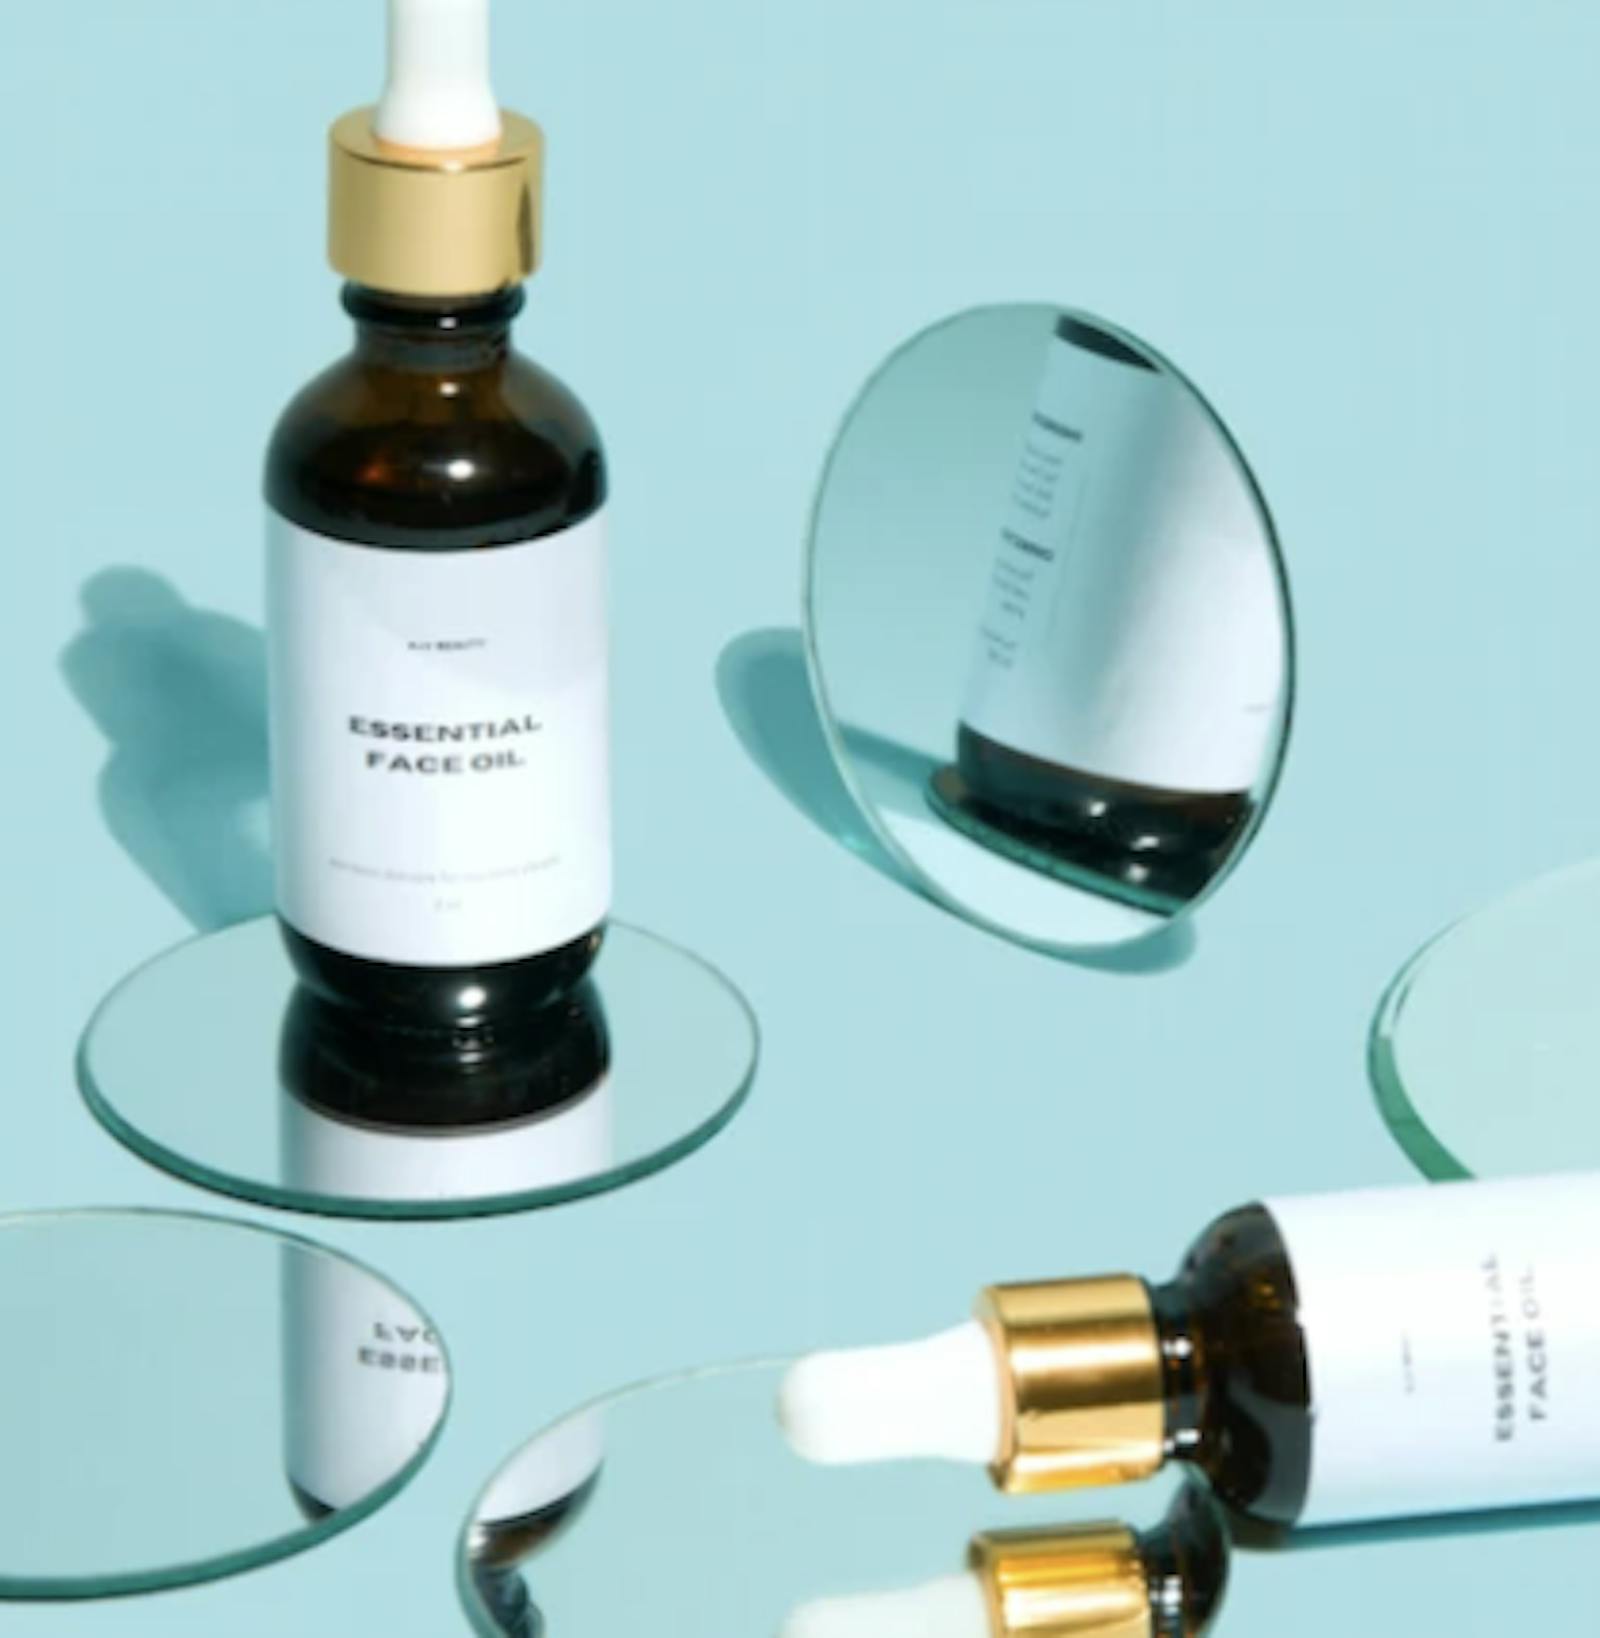 READ: BuzzFeed "30 Easy-To-Use Products To Help You Ease Into A Skincare Routine"